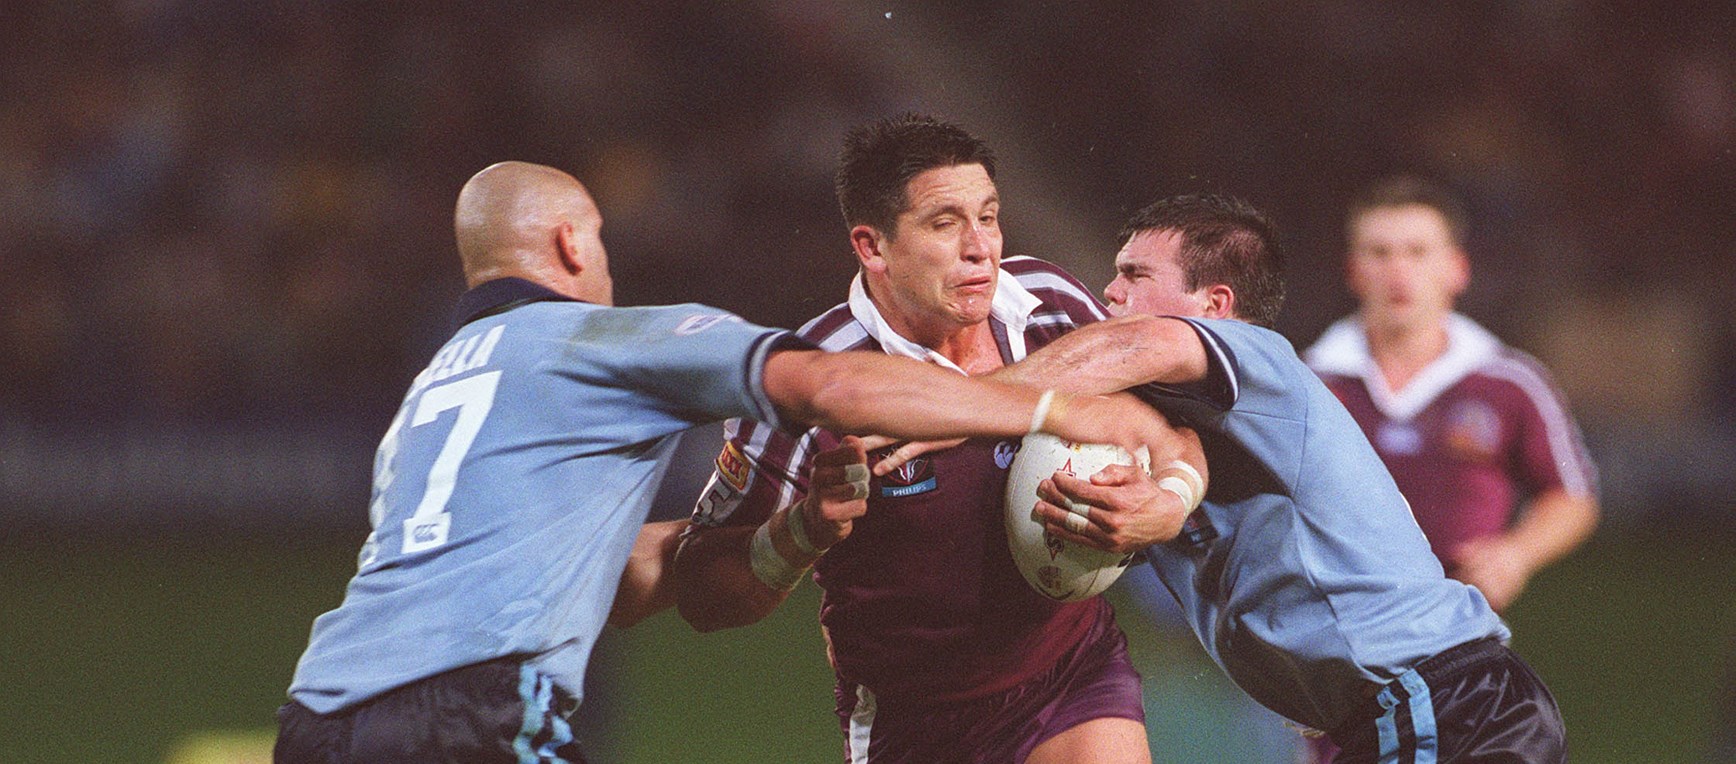 In pictures: 2002 State of Origin